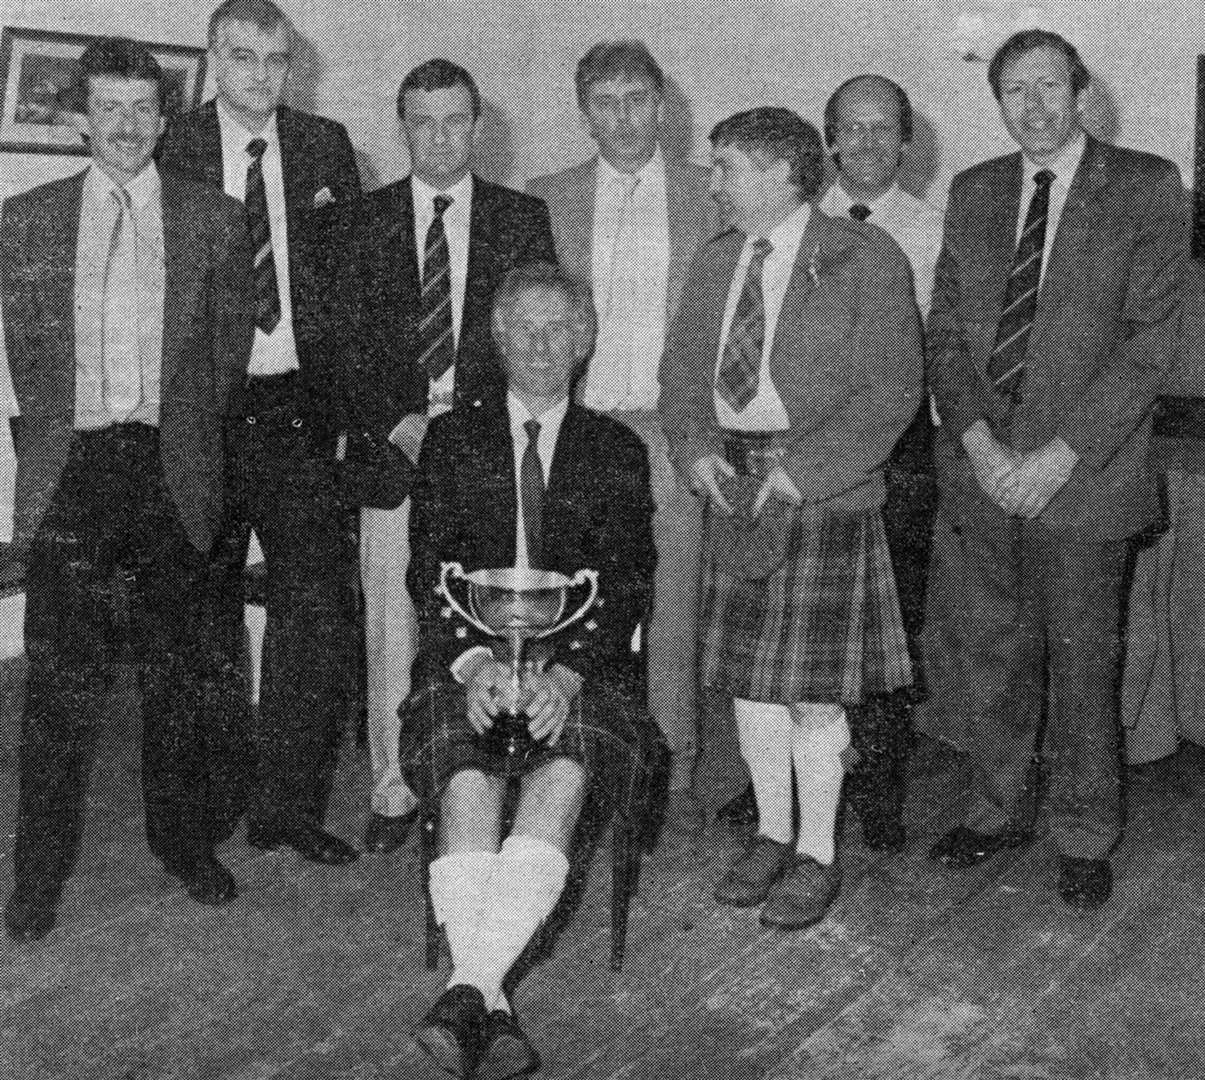 Bobby MacLeod, Alan Syme, David Cowie Adam MacPherson, Christopher Yuill, Allan Lannon with Norrie Brown seated holding the cup at a 25 year reunion in event at the Sutherland Arms in 1989. Ian Taggart was unable to attend as he was, at the time, Secretary of Aberdeen FC and had to be in attendance at Pittodrie for a Scottish league match.